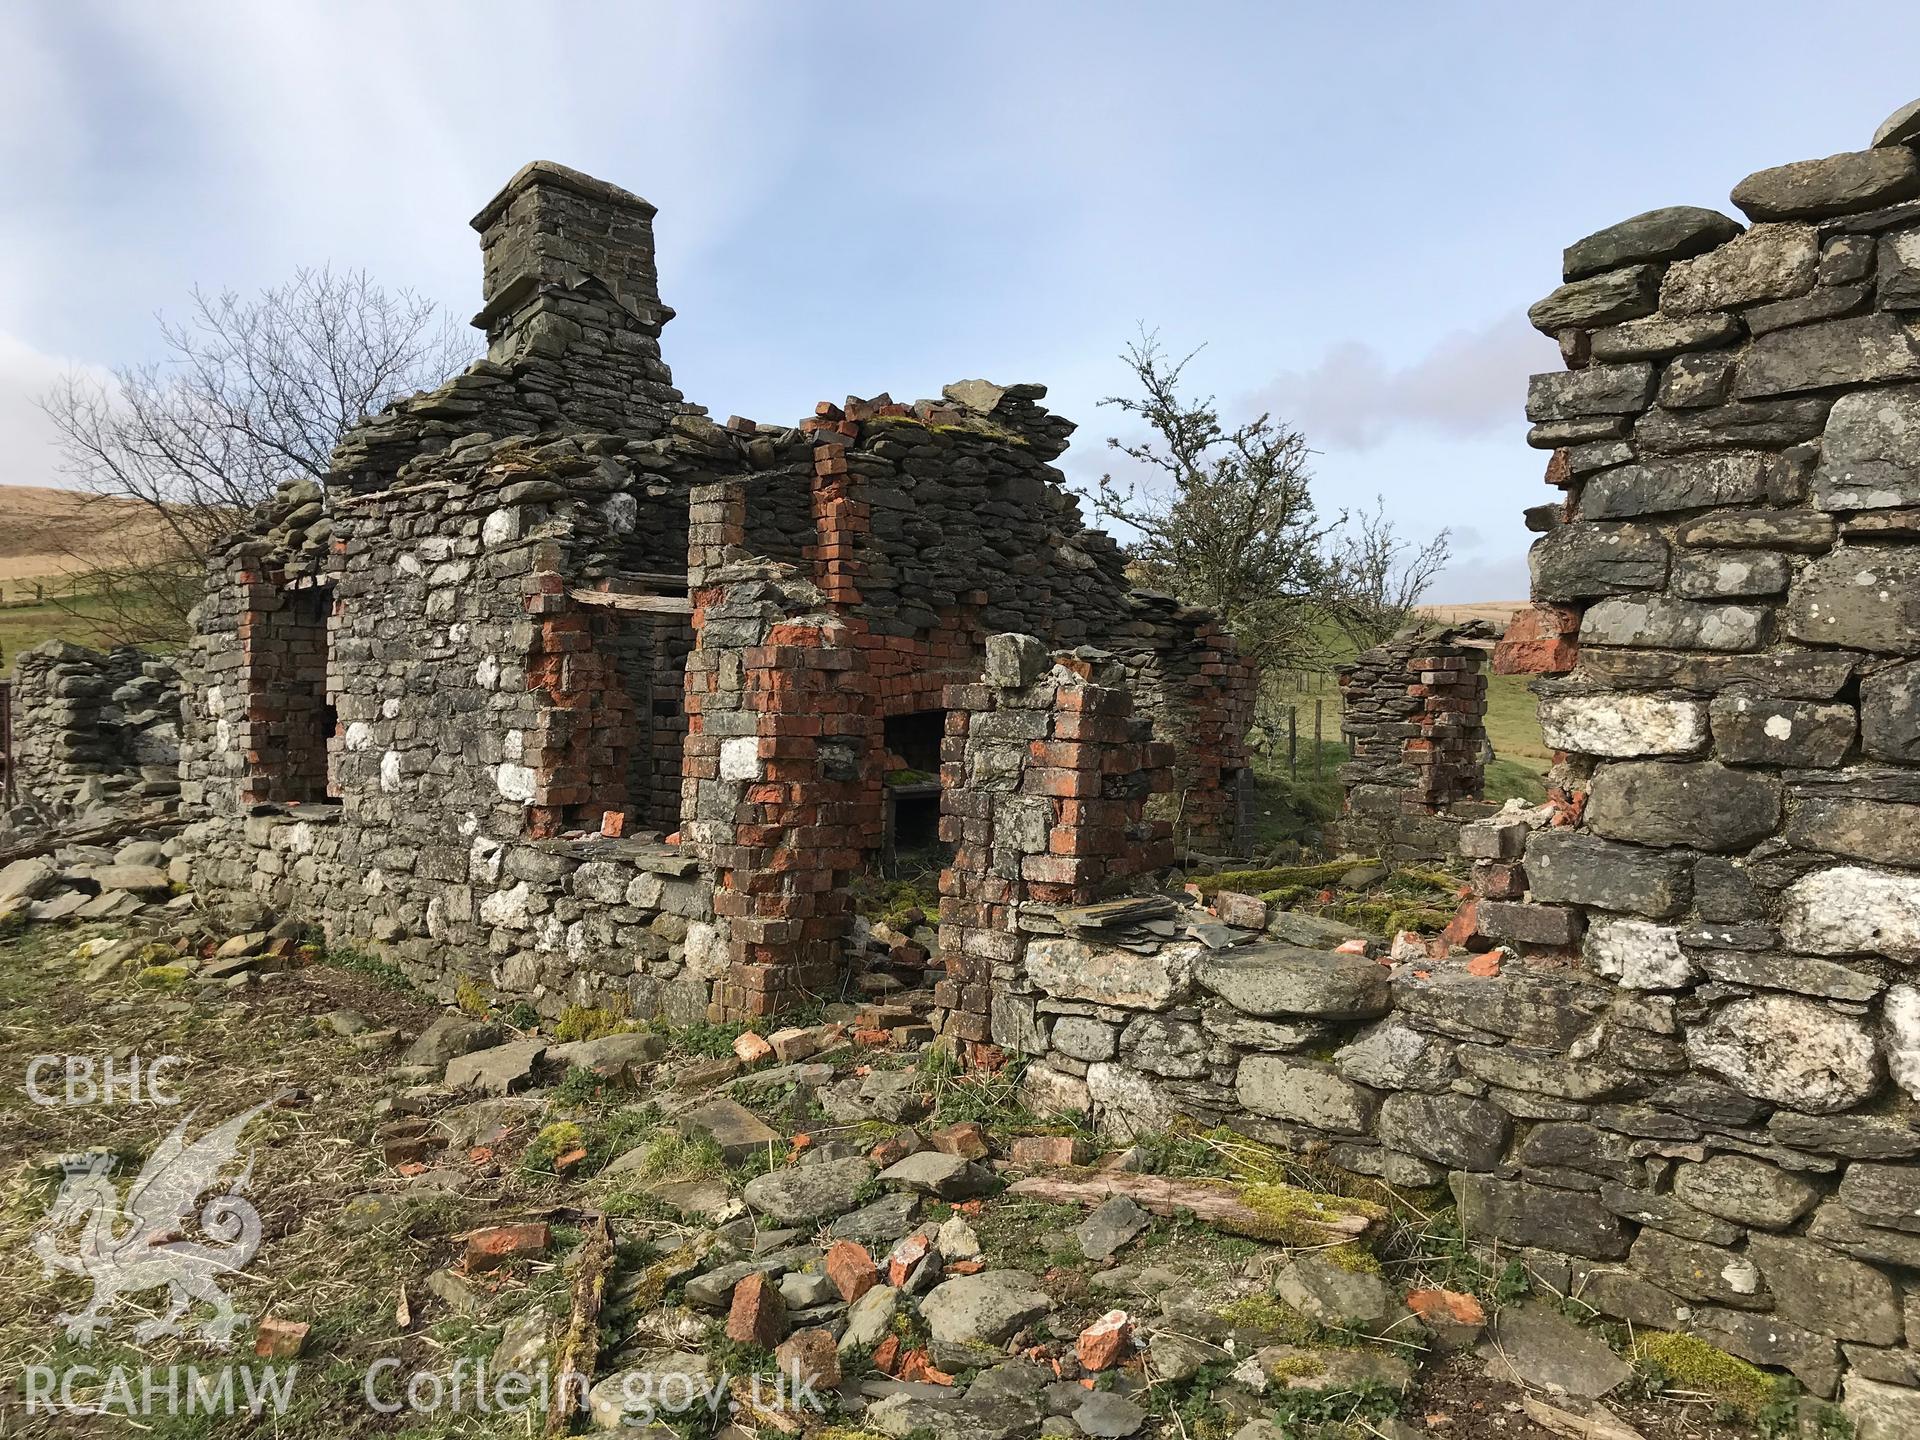 Colour photograph of Lluest Aber Caethon deserted farmstead, west of Rhayader, taken by Paul R. Davis on 23rd March 2019.